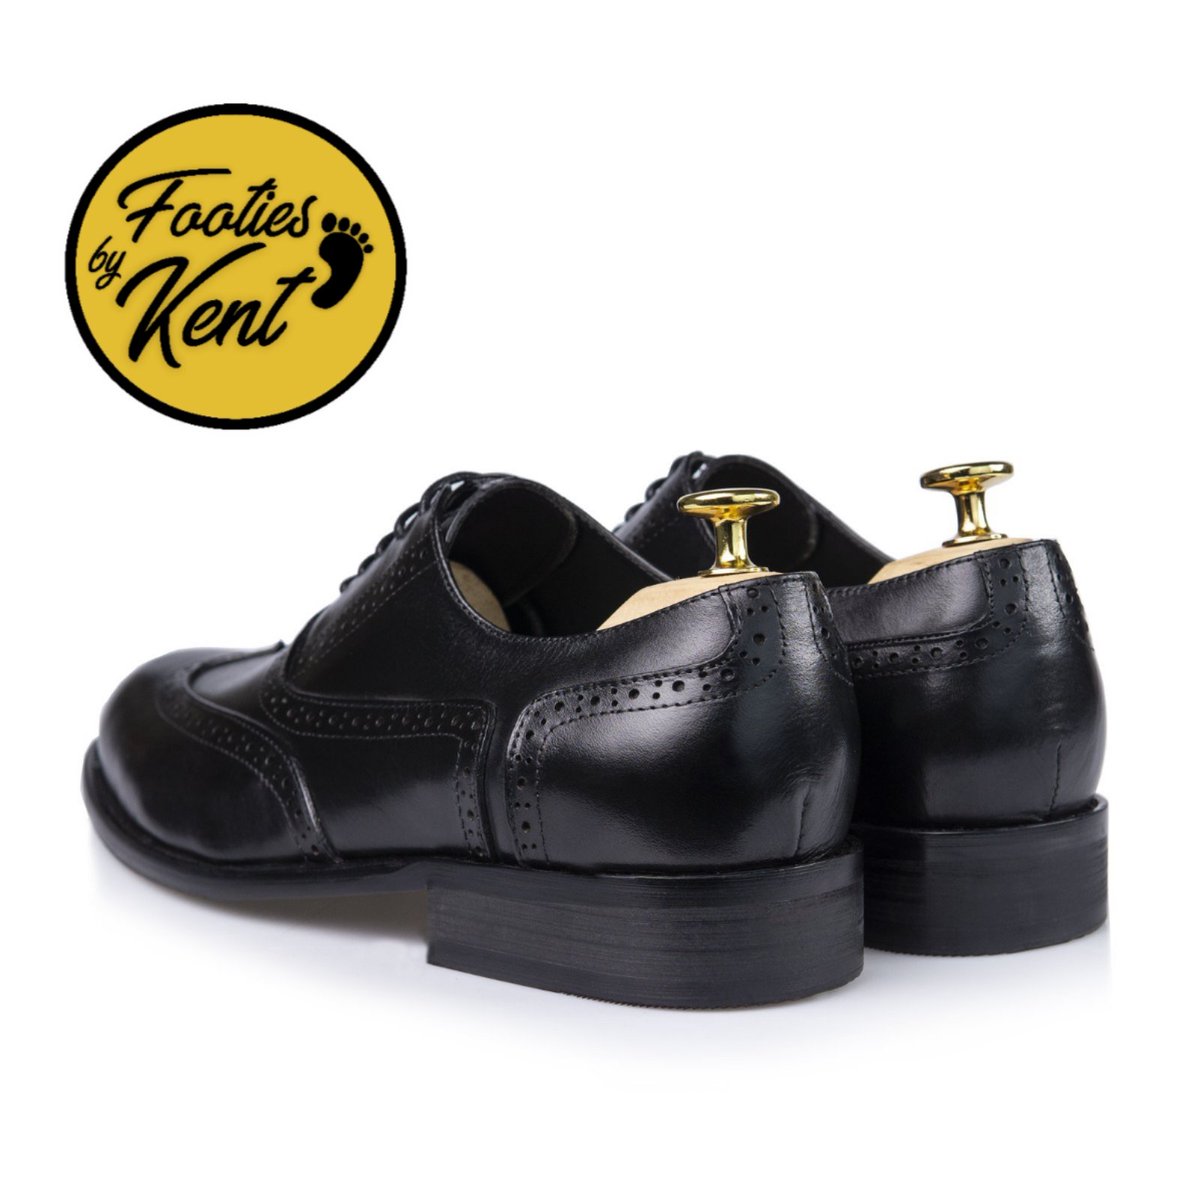 A gentleman's shoe, with classic English styling. Quintessential businesswear for professionals, and the perfect addition to a smart casual wardrobe. Made from the finest calf leather with Semi brogue detail.

Price: ₦22,000